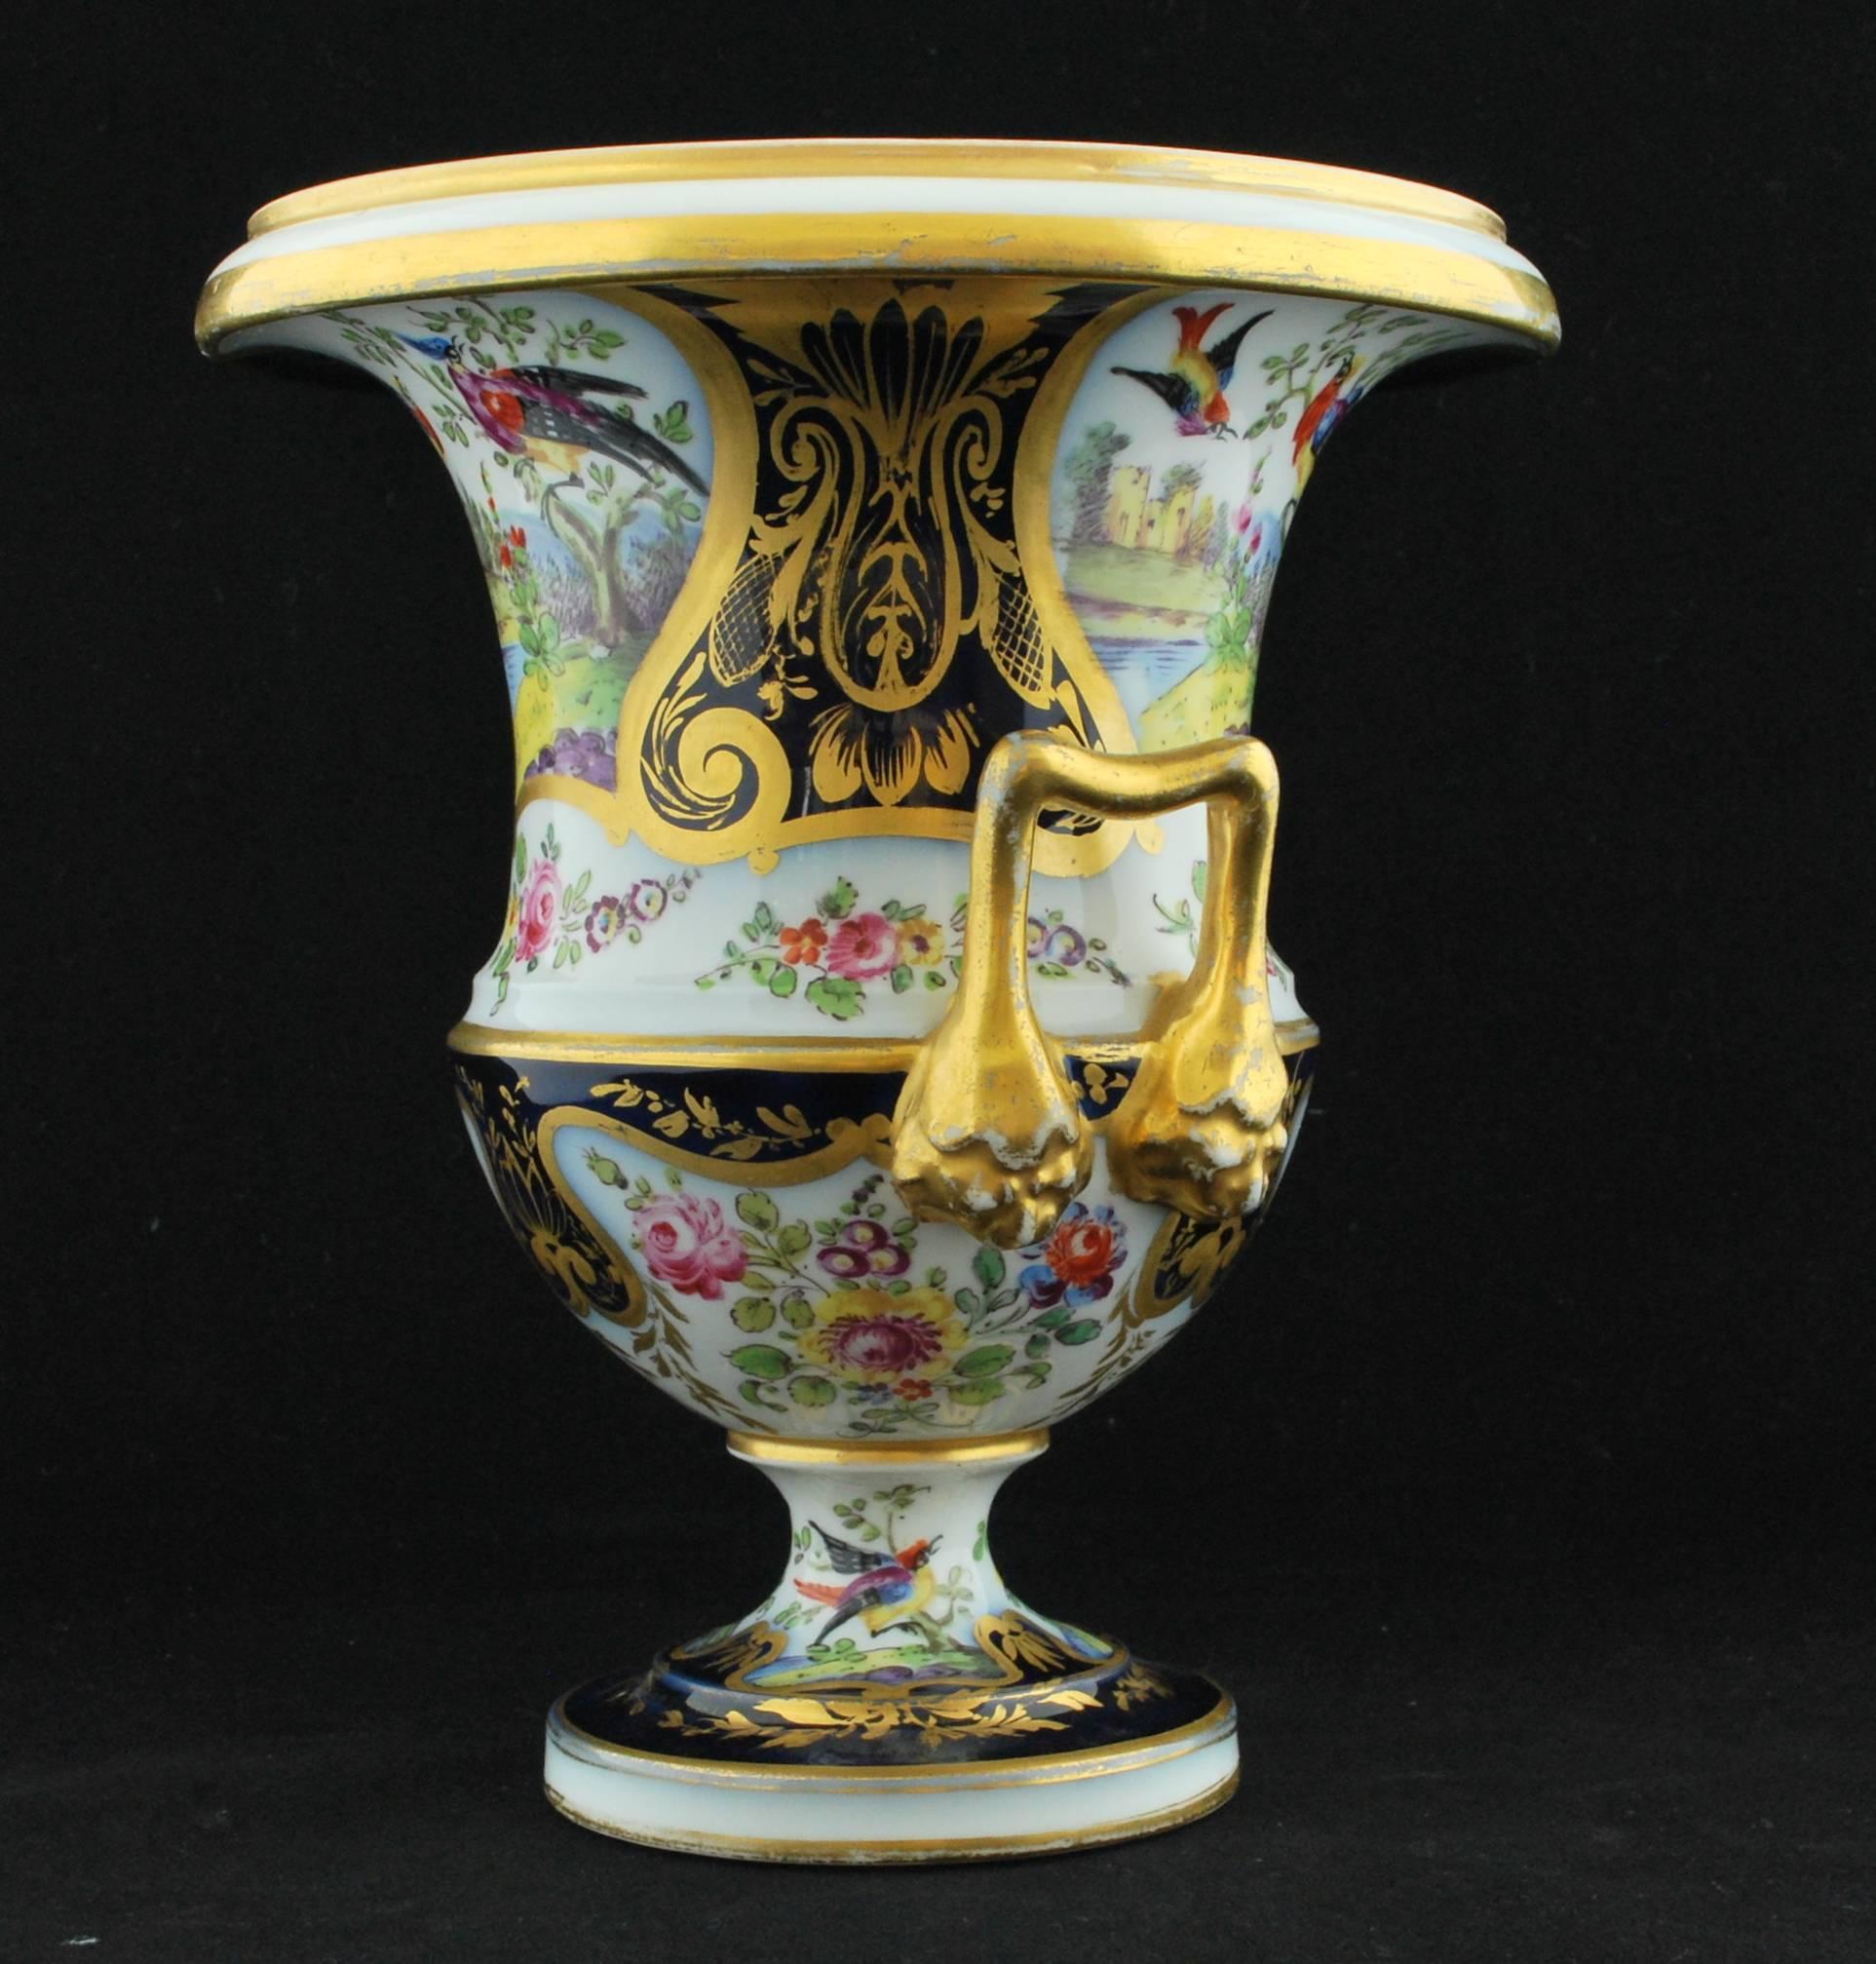 19th Century Pair of Campana Vases, Dublin Decorated, Derby Porcelain Works, circa 1810